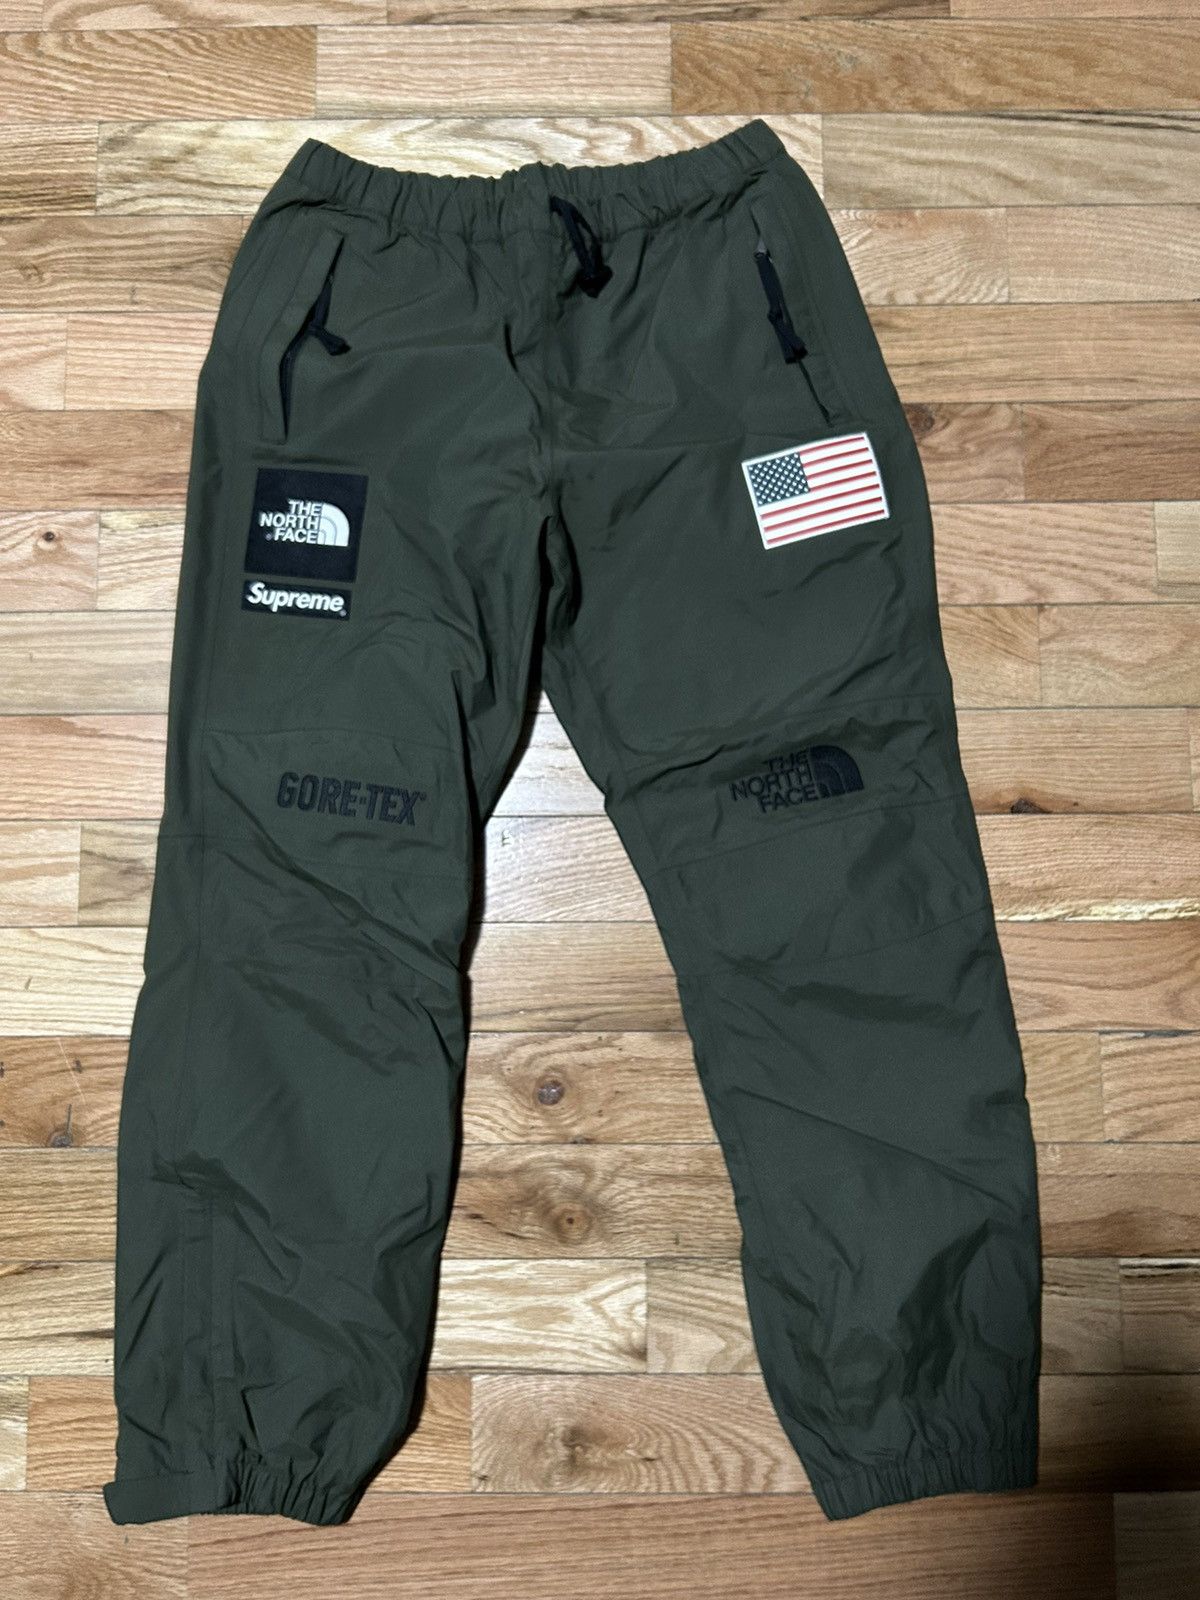 Supreme Supreme x The North Face Trans Antarctica Expedition Pants